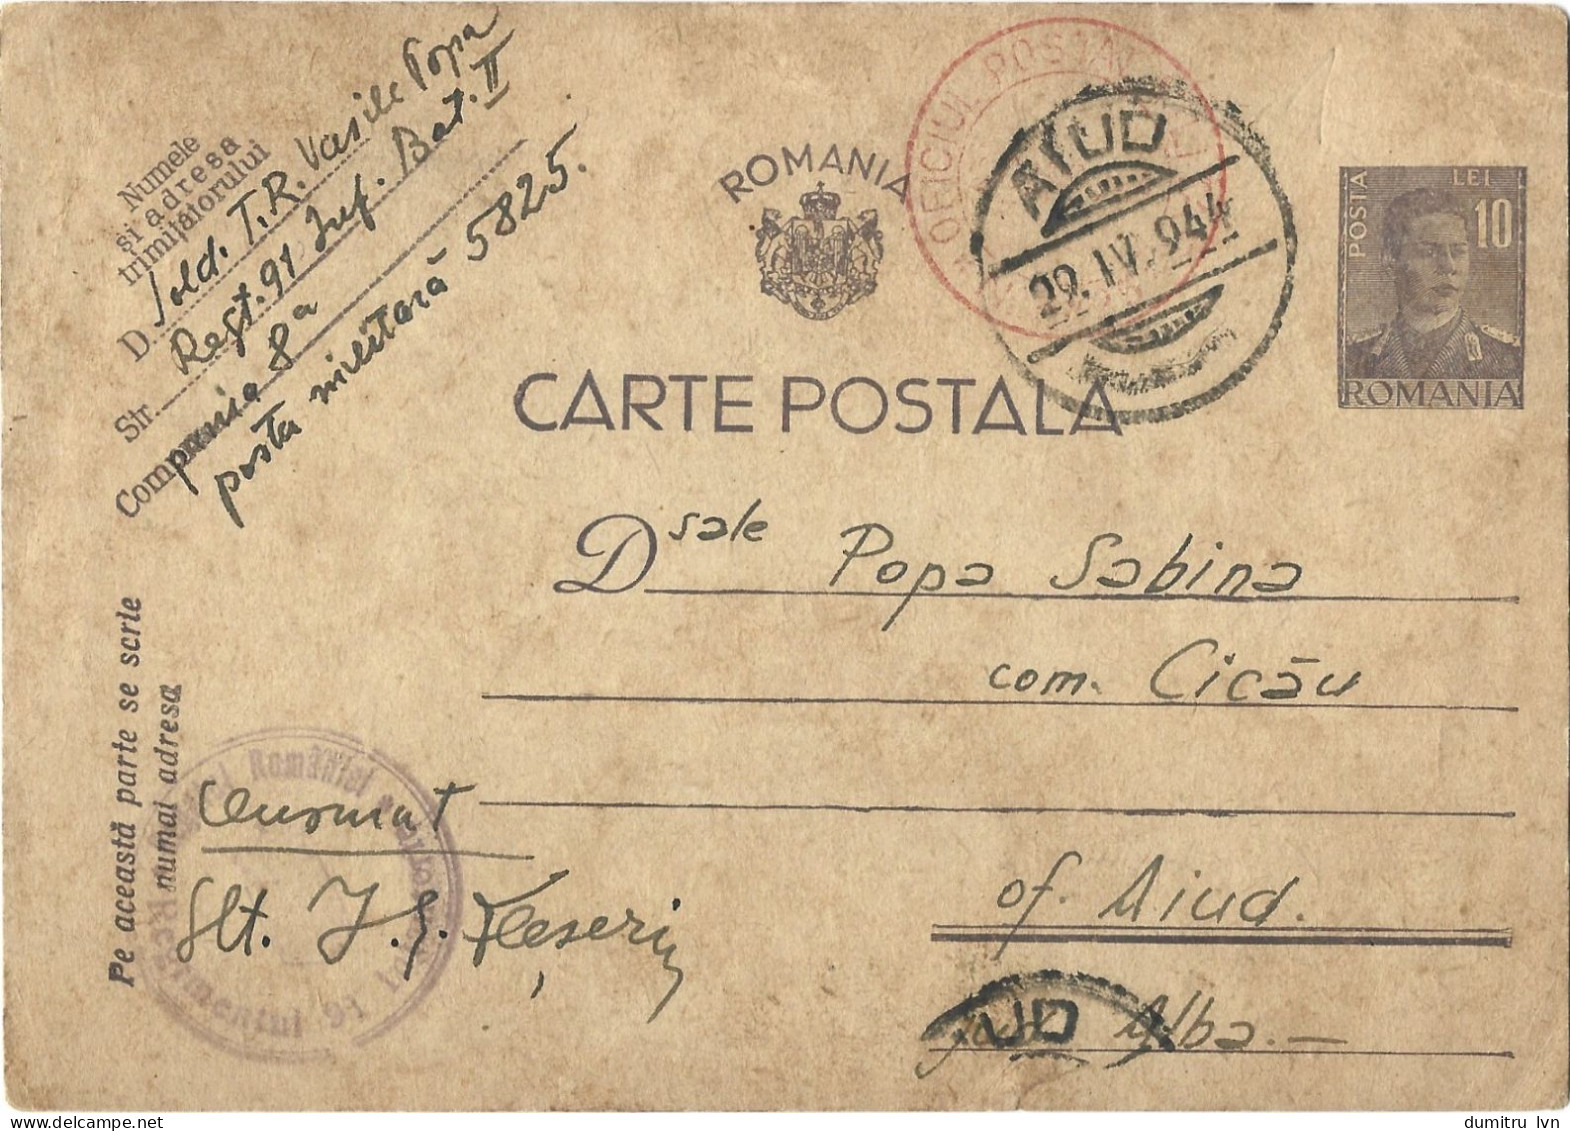 ROMANIA 1944 POSTCARD, MILITARY CENSORED, OPM 5825, POSTCARD STATIONERY - World War 2 Letters